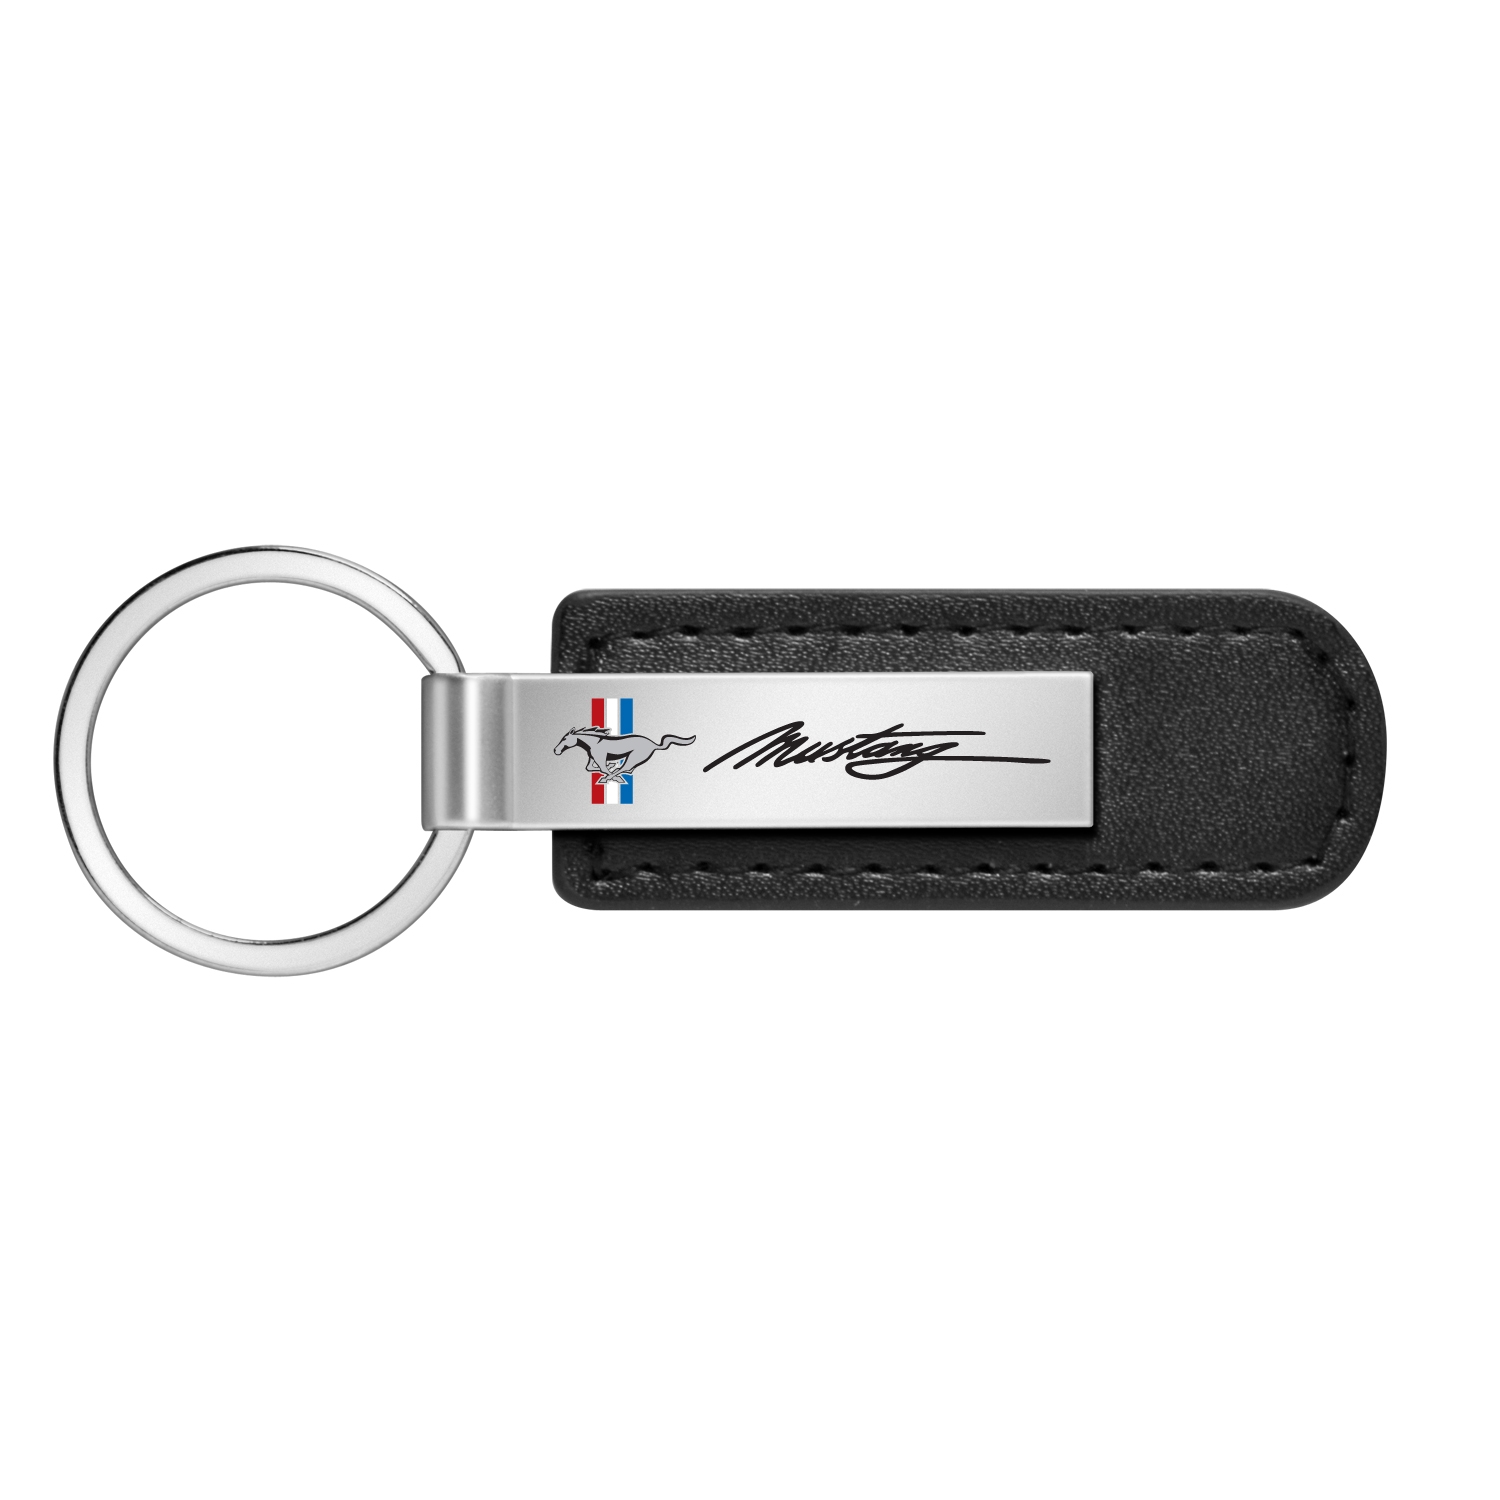 Ford Mustang Script Black Leather Strap Key Chain